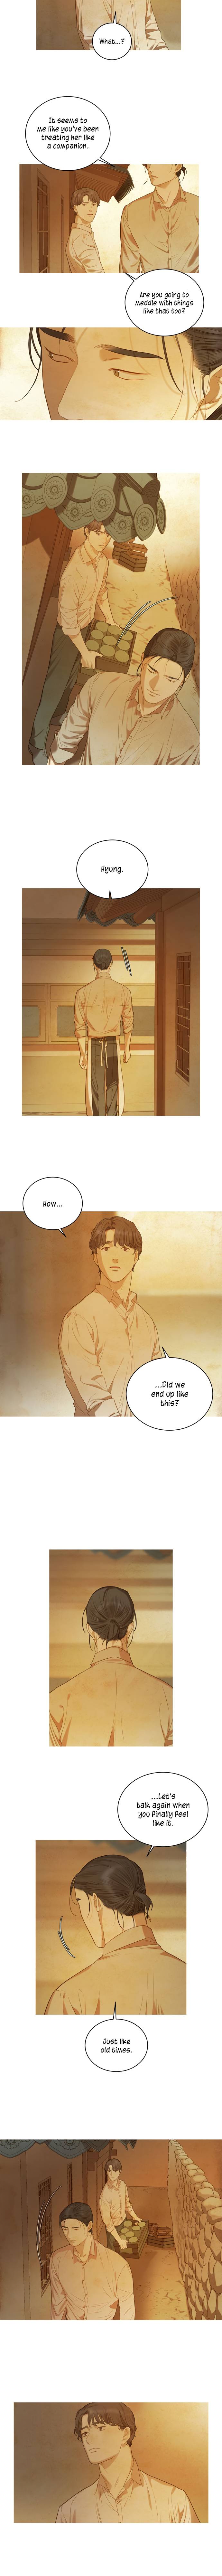 Gorae Byul - The Gyeongseong Mermaid - Chapter 43 Page 7